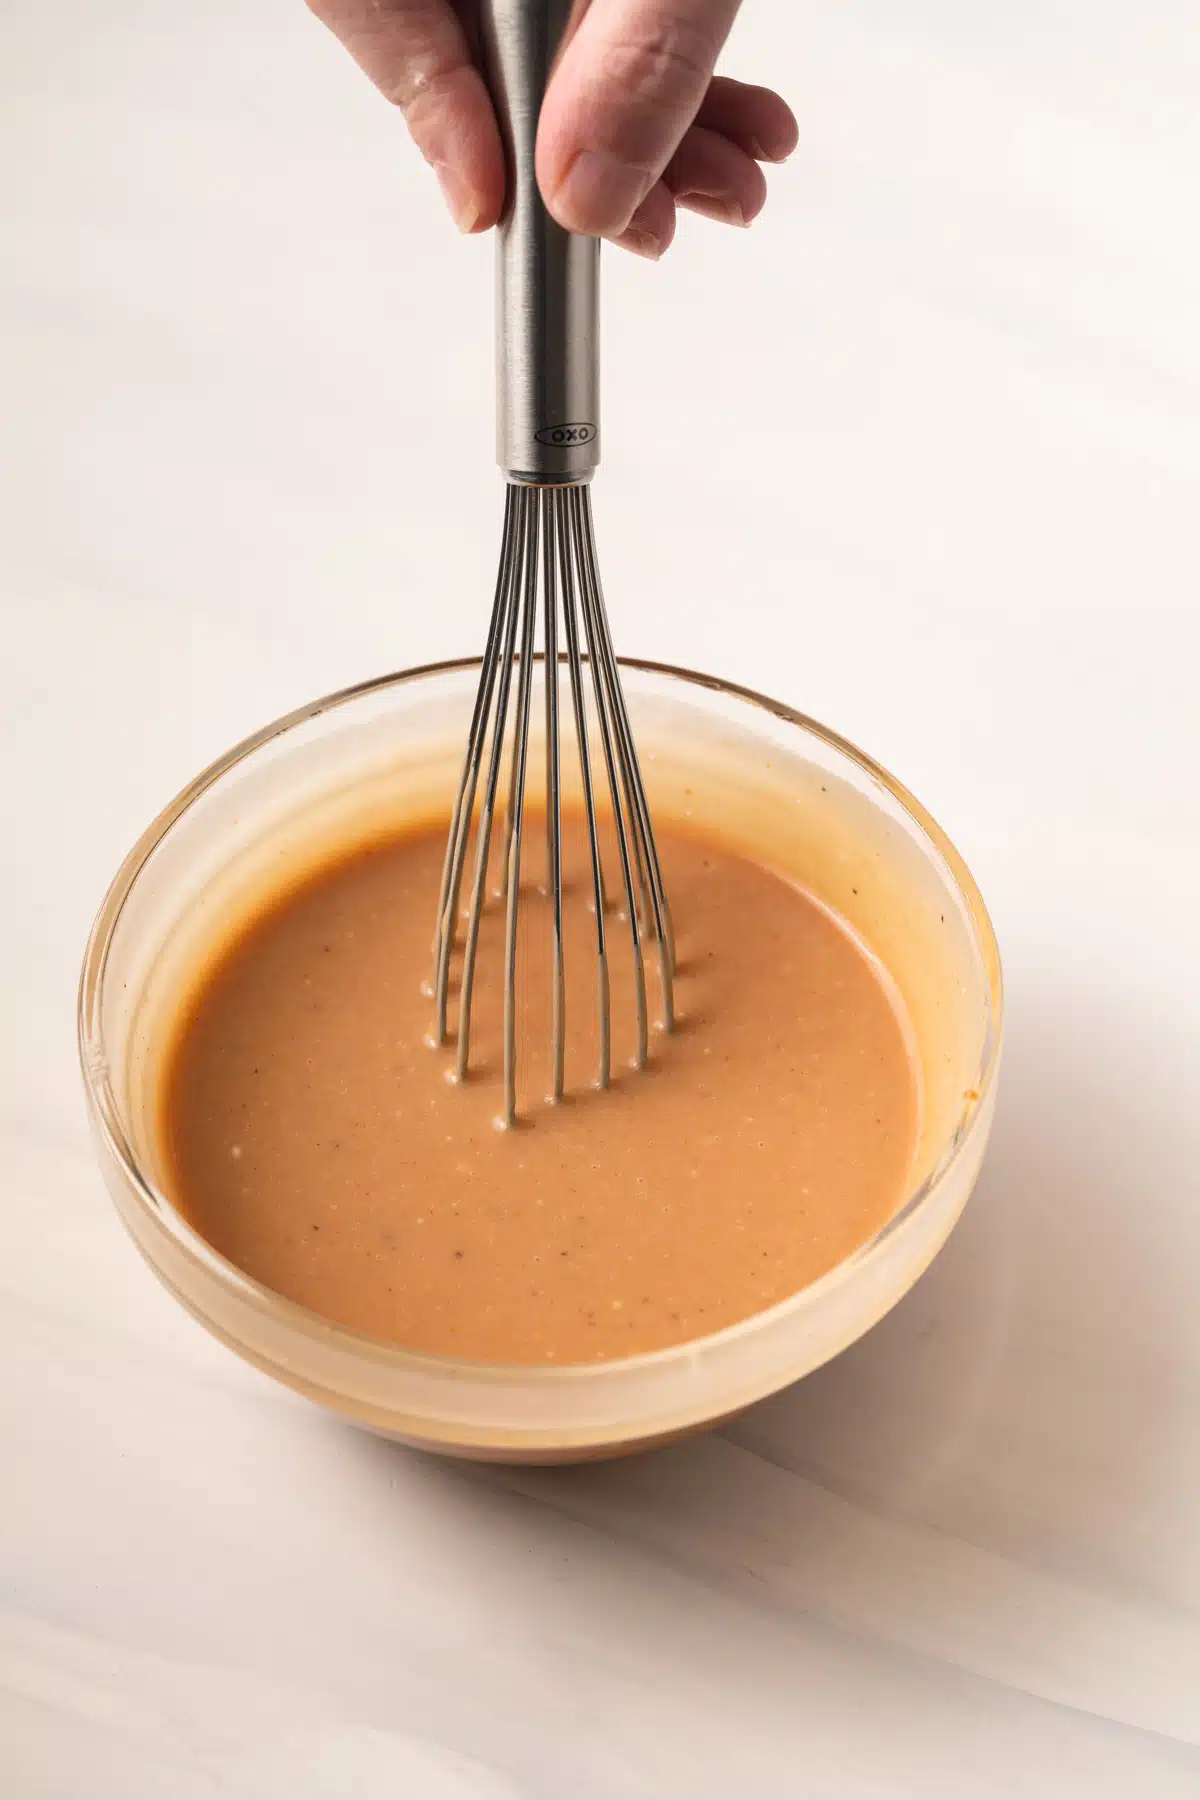 Mixing chicken nugget dipping sauce with a whisk.